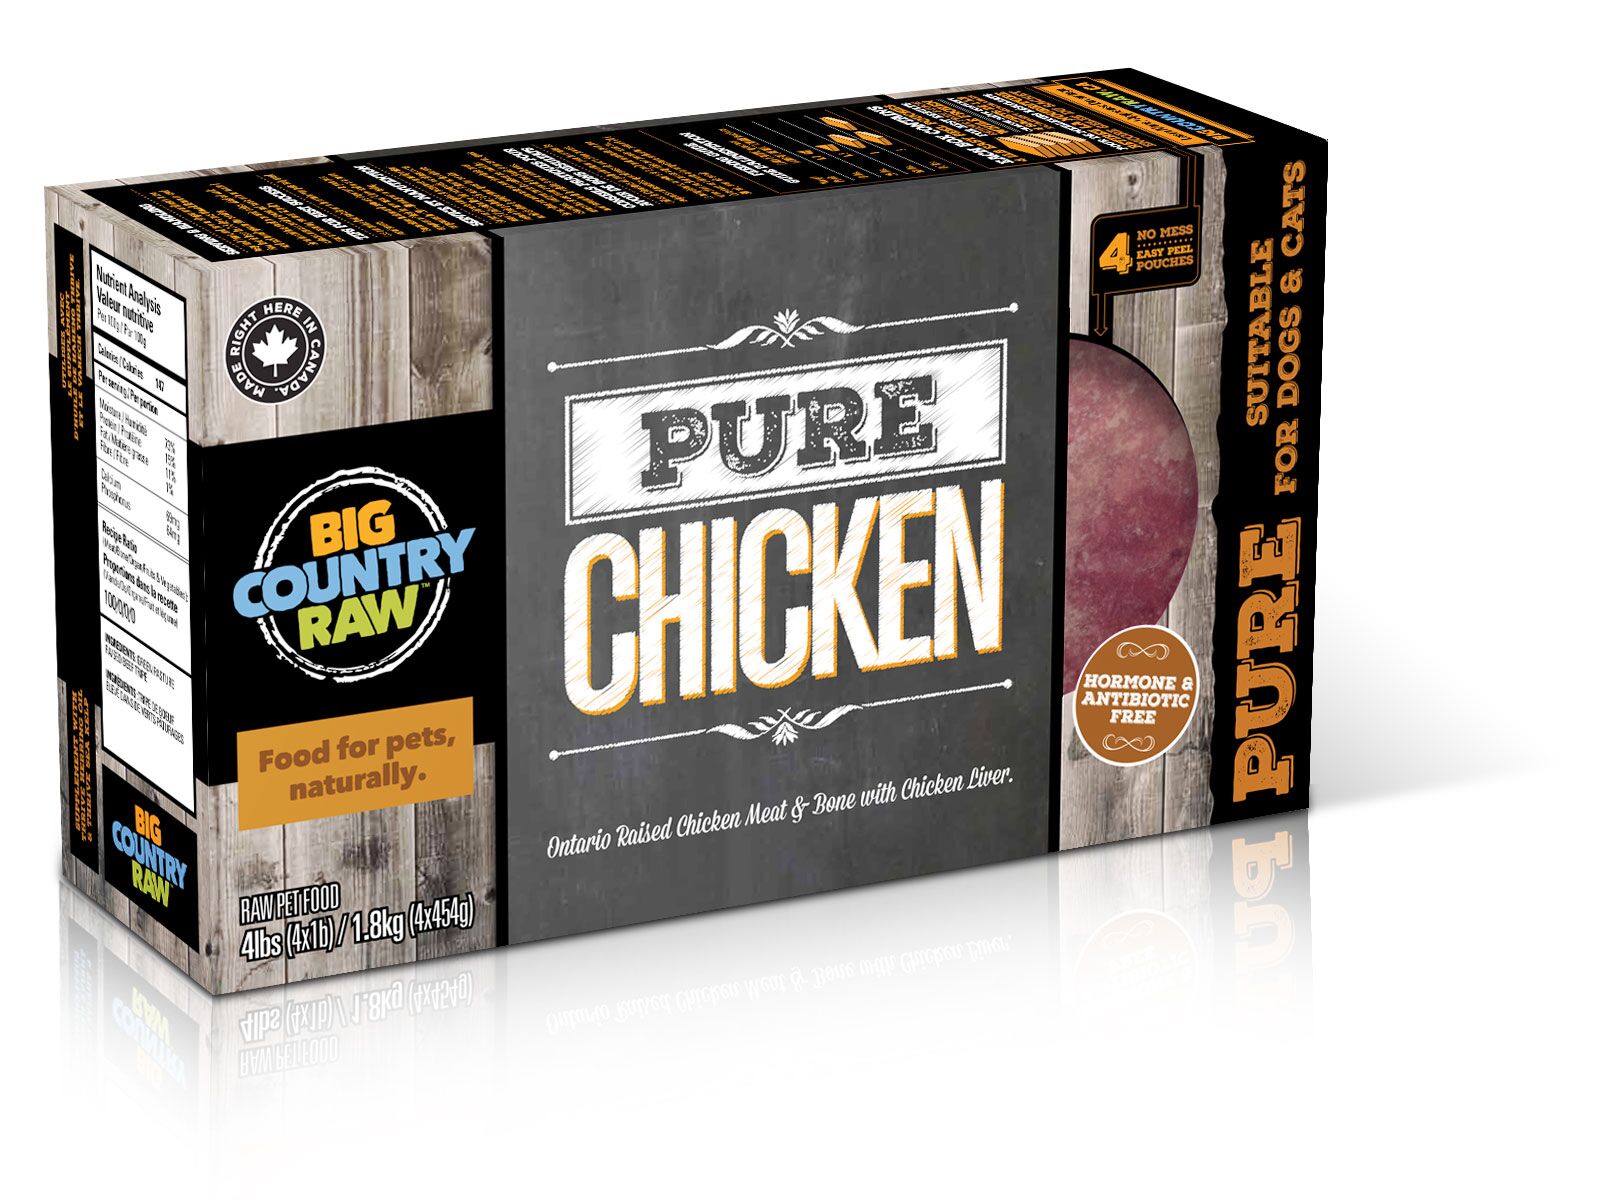 Big Country Raw Pure Chicken - Free